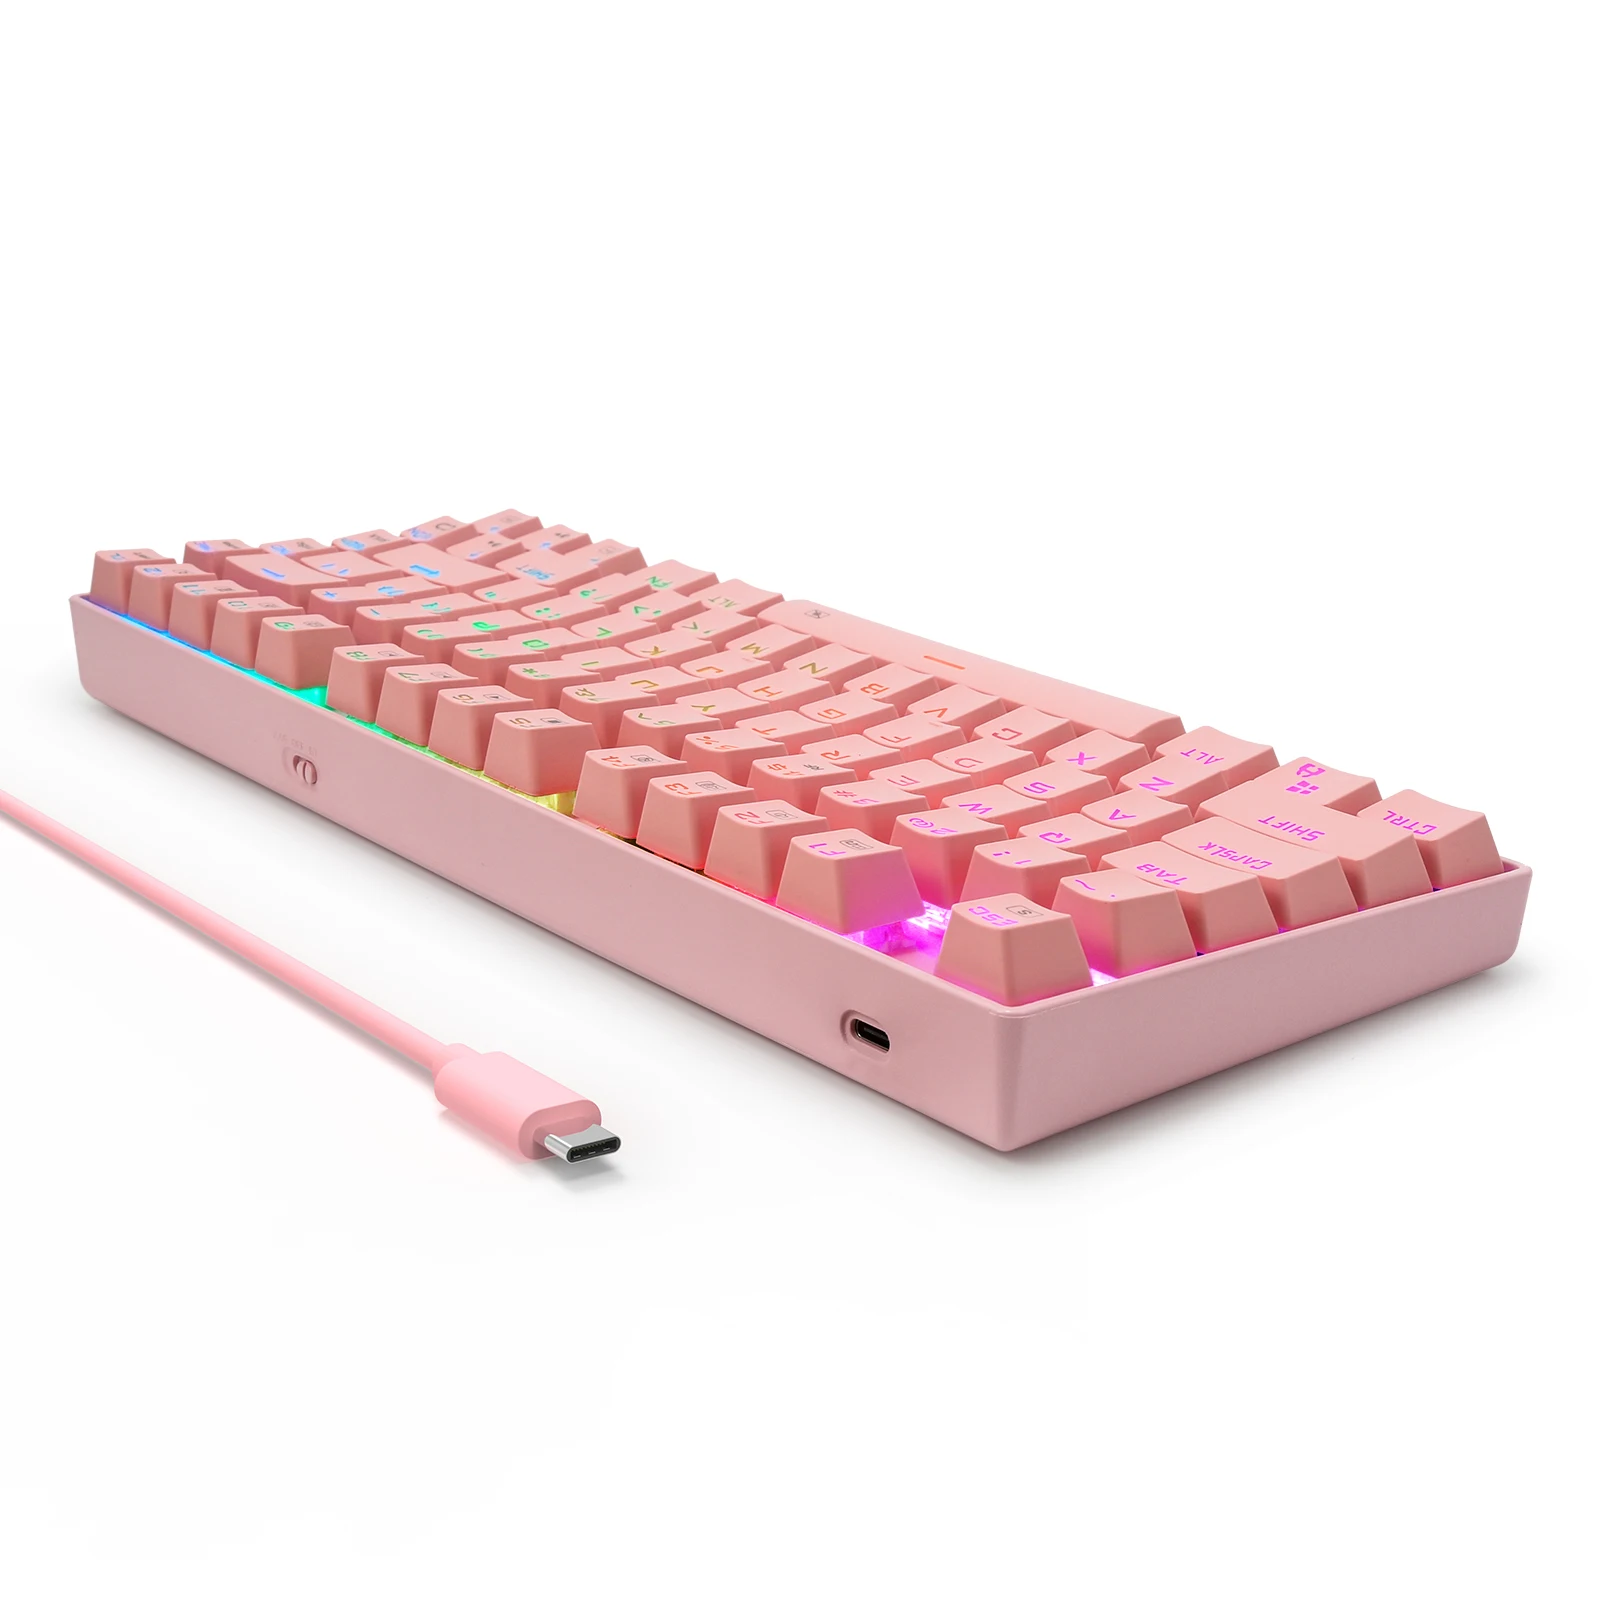 HUO JI E-YOOSO Z-88 Pink Wired Wireless Dual Mode TKL Mechanical Keyboard RGB Backlit Outemu Mechanical Switch Removable Cable enlarge